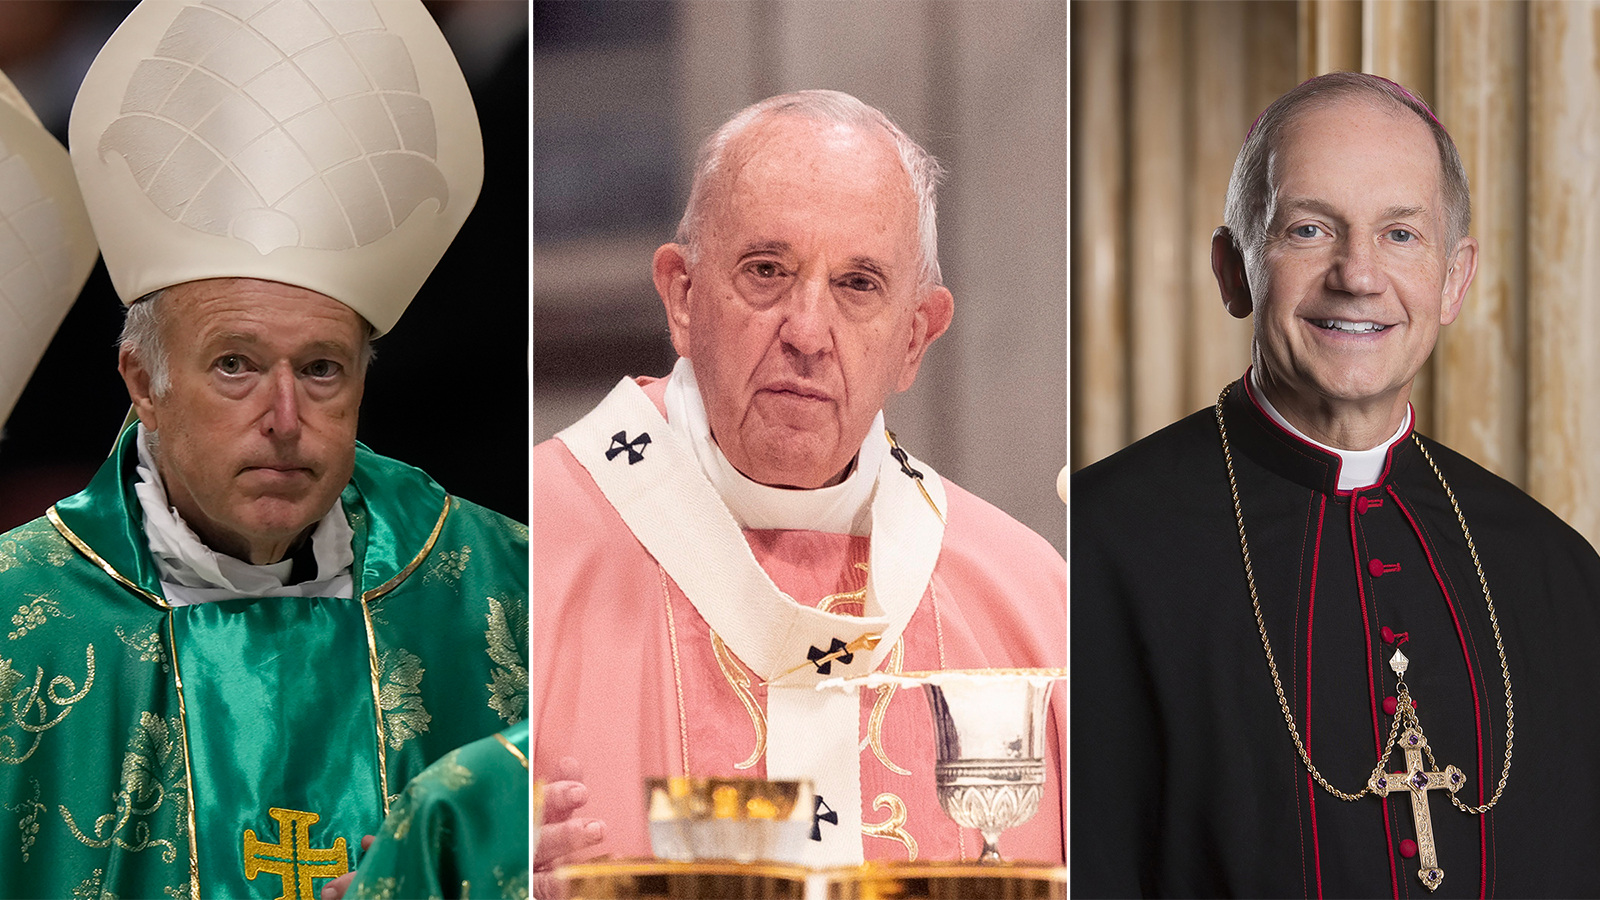 Cardinal Robert McElroy, from left, Pope Francis and Bishop Thomas Paprocki. (AP Photos; Courtesy of the Diocese of Springfield in Illinois)